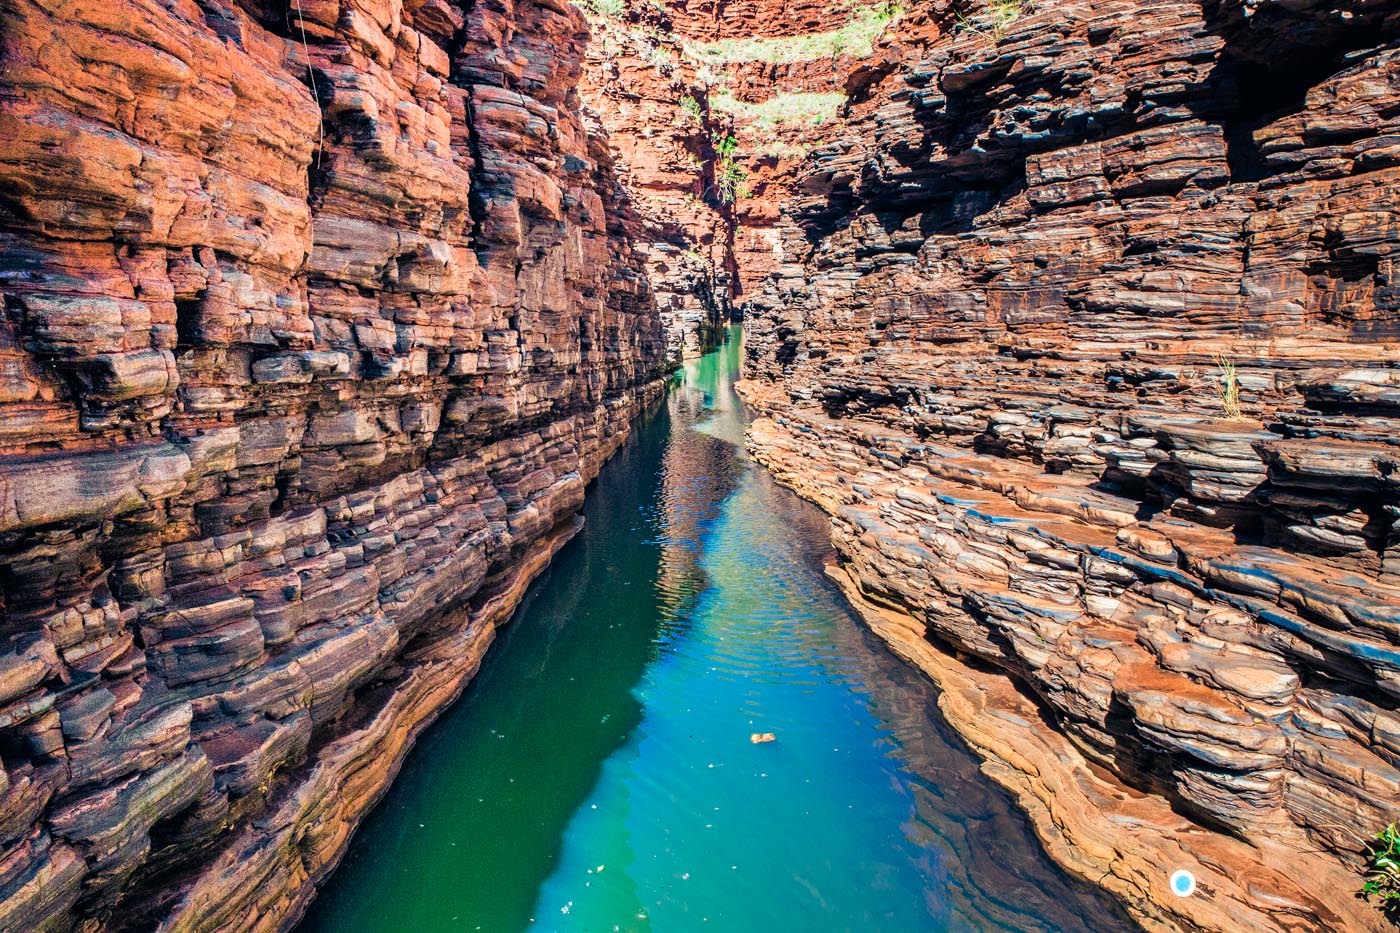 16 Amazing Photos That Will Make You Want to Visit Karijini National Park